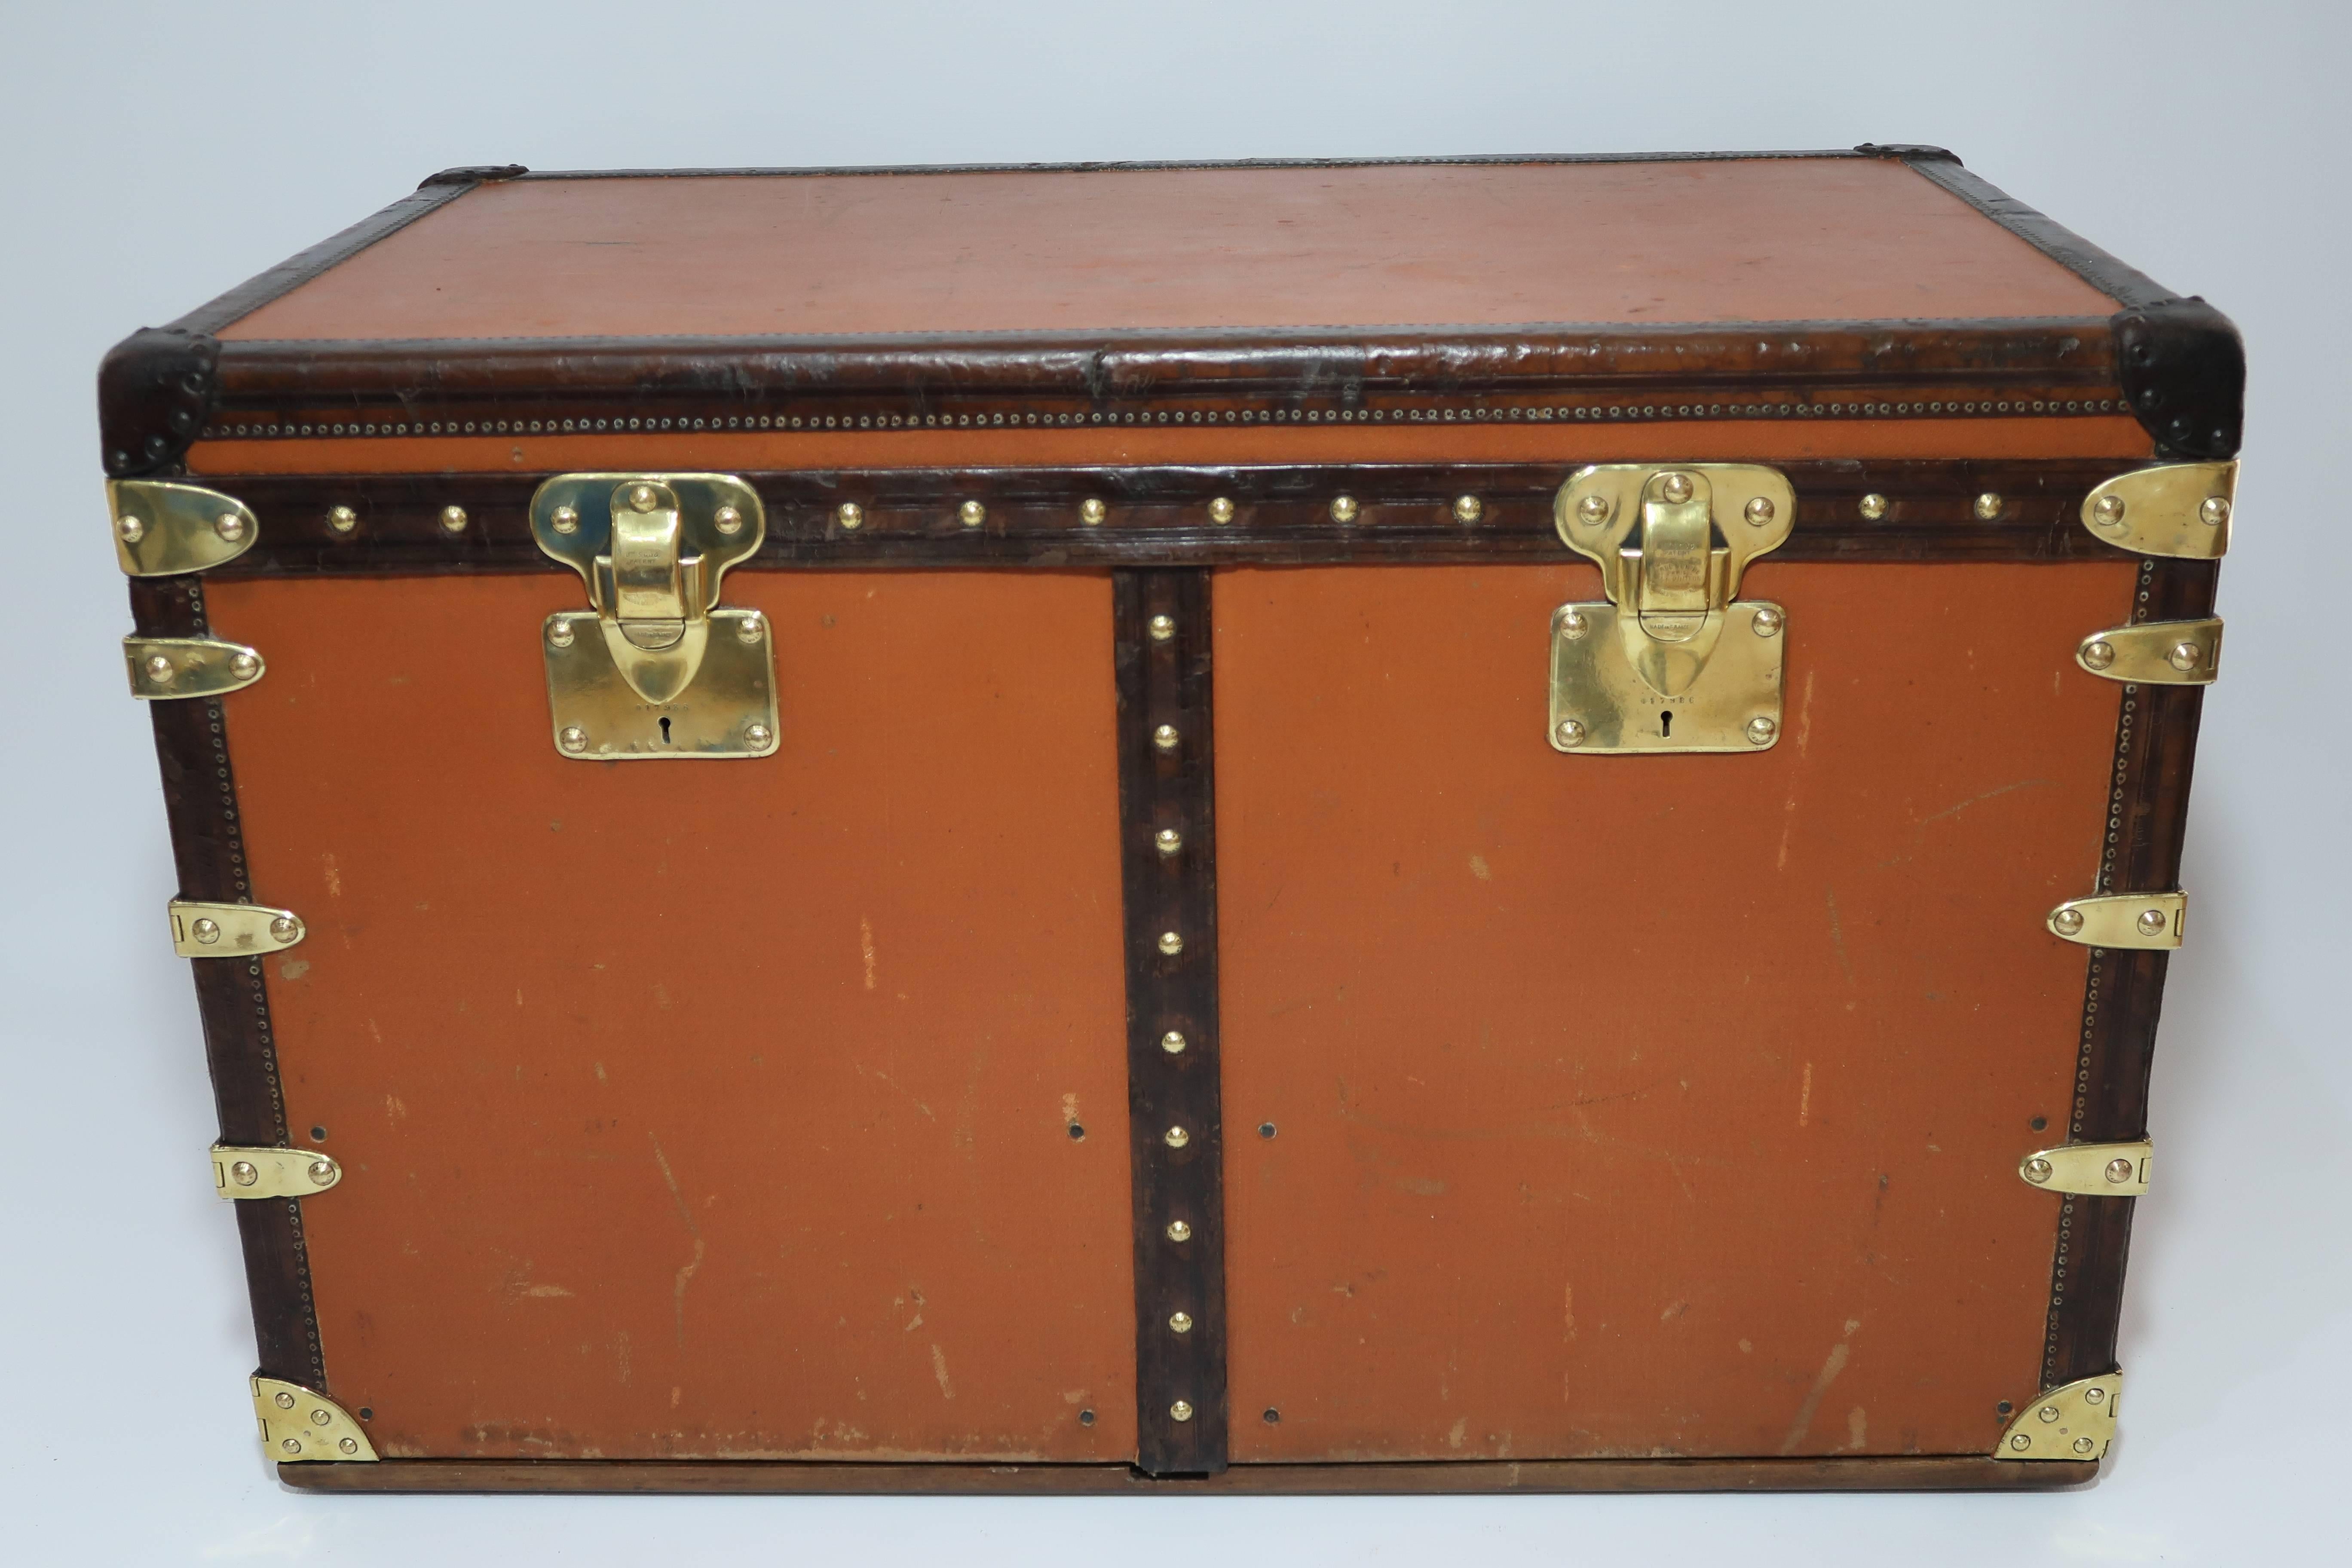 For sale a Louis Vuitton malle chemise (shirts trunk), covered in Vuittonite canvas, with a complete interior, leather bounding and brass hardware in amazing condition for its age.
As seen on the LV legendary trunks book a true collector's item not